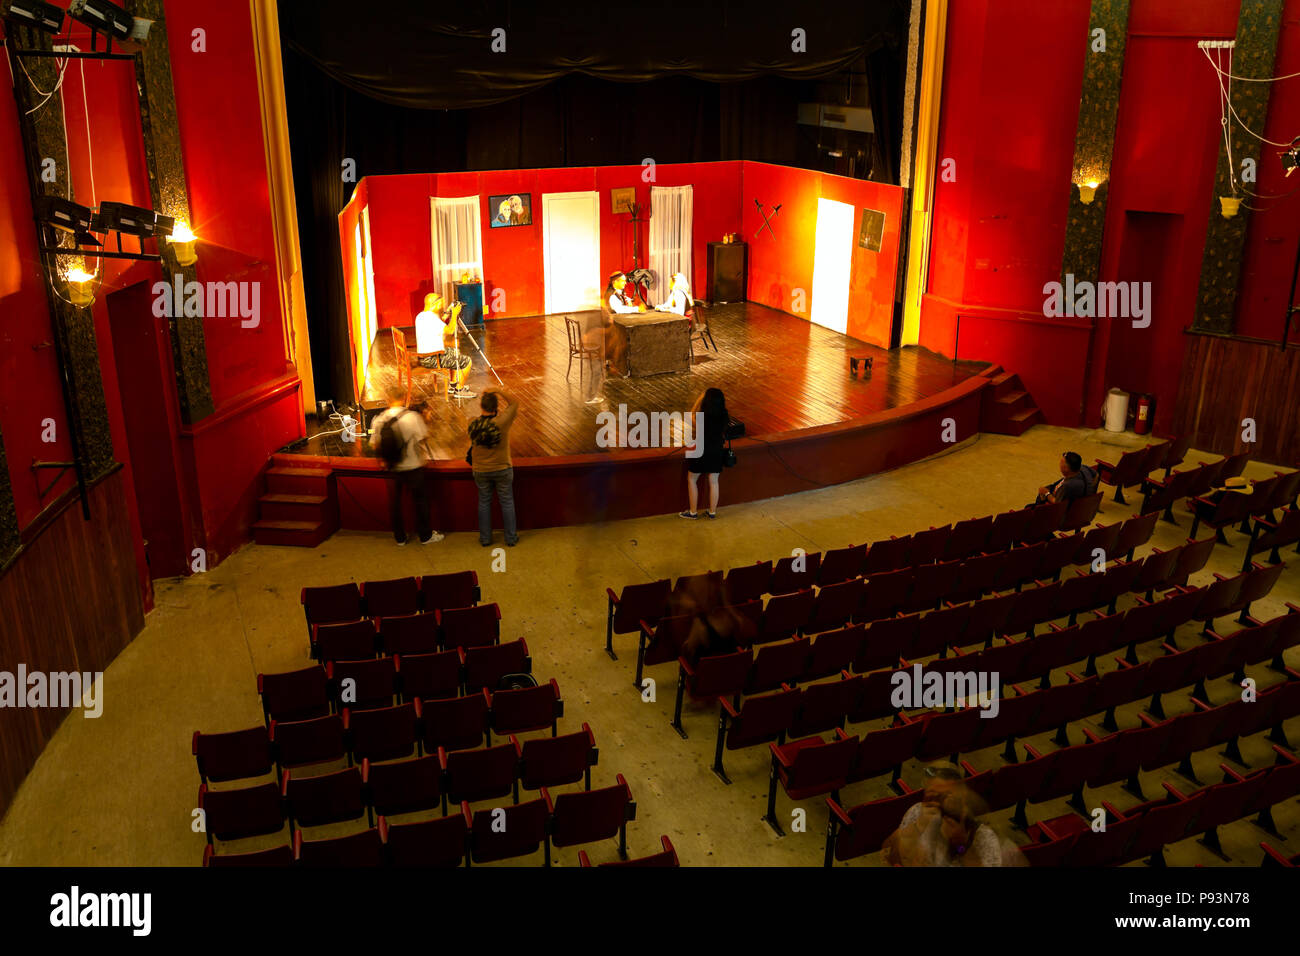 Long exposure photo, photographers are taking photo together of young woman posing in empty theater stage. Stock Photo